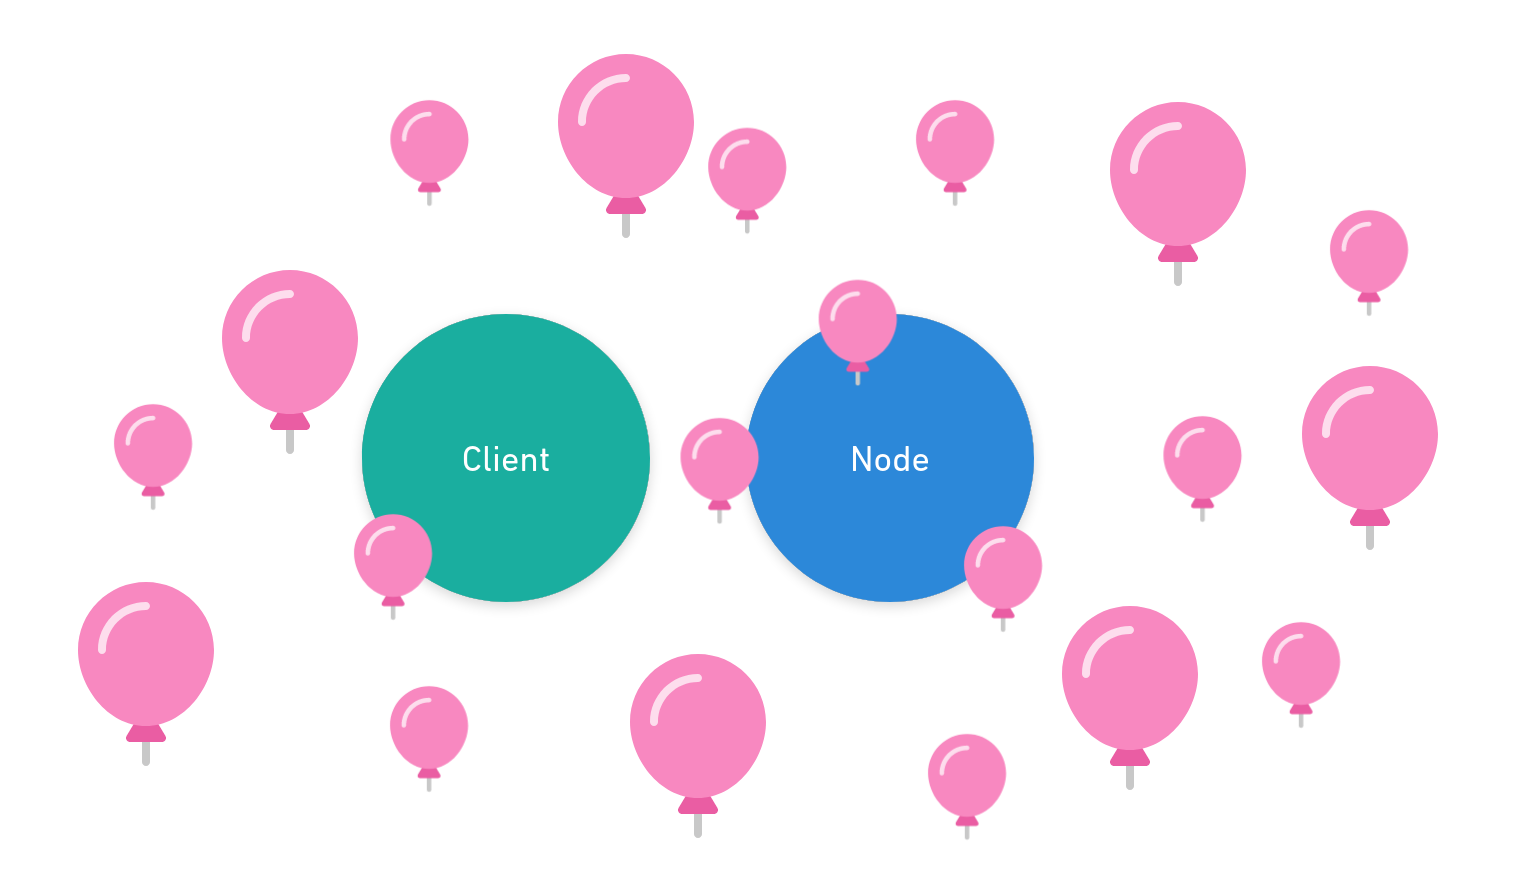 Client and Node at a party